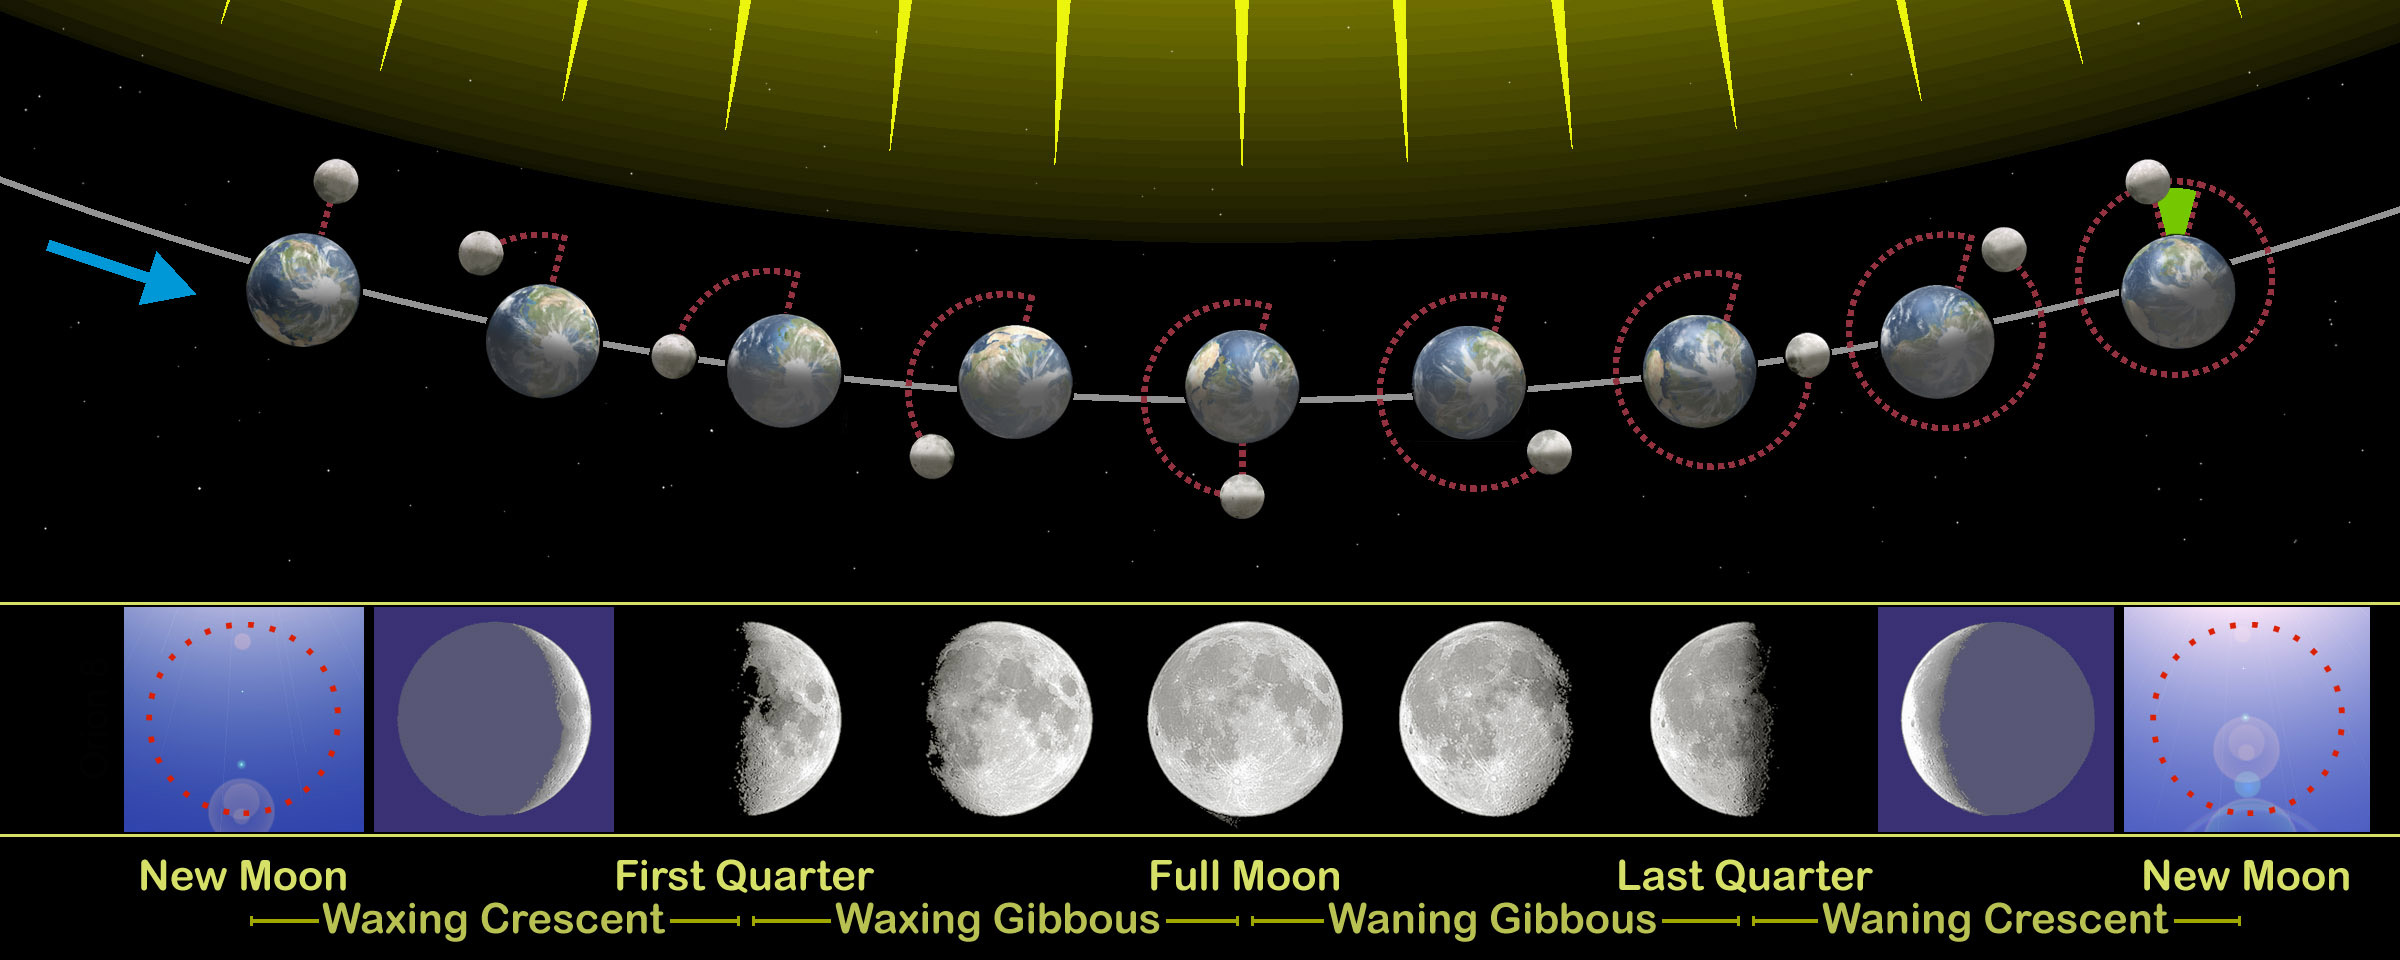 The relation of the phases of the Moon with its revolution around Earth. The sizes of Earth and Moon, and their distance you see here are far from real. On this image the following are also depicted: the synchronous rotation of the Moon, the motion of the Earth around the common center of mass, the difference between the sidereal and synodical month (green mark), the Earth’s axial tilt. Credit: Orion 8 via wikipedia.com